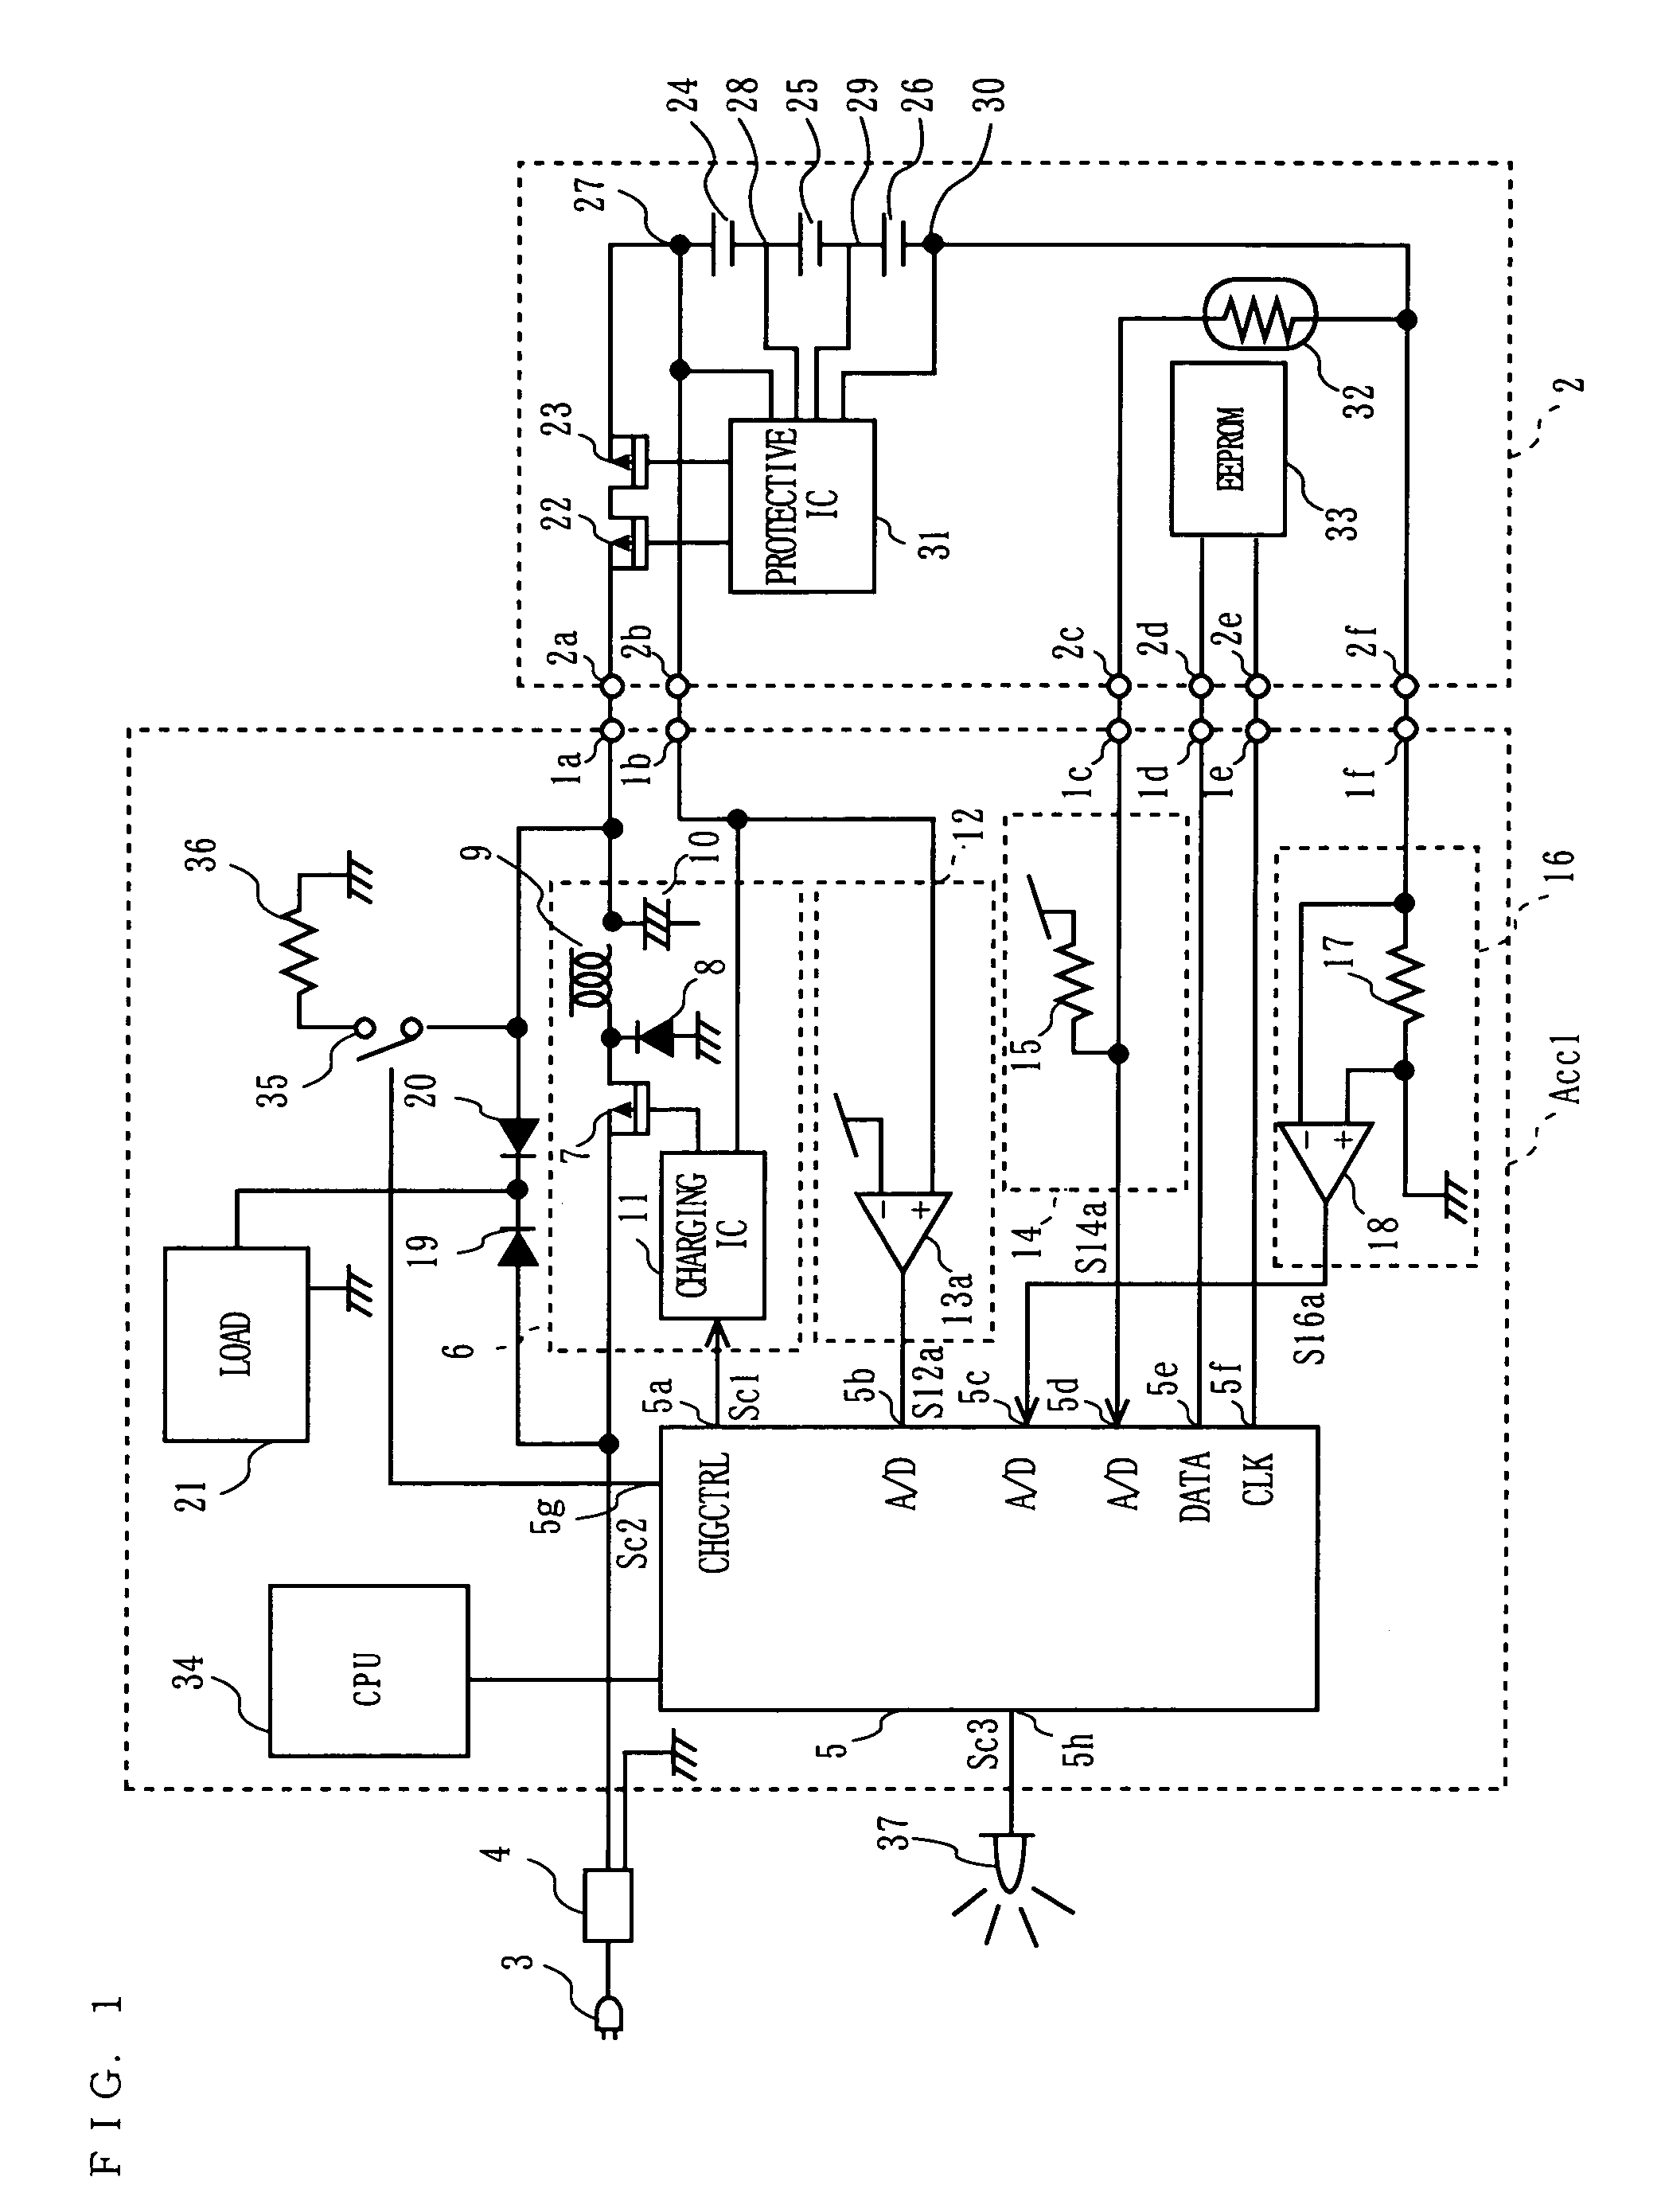 Charge control device for a secondary battery